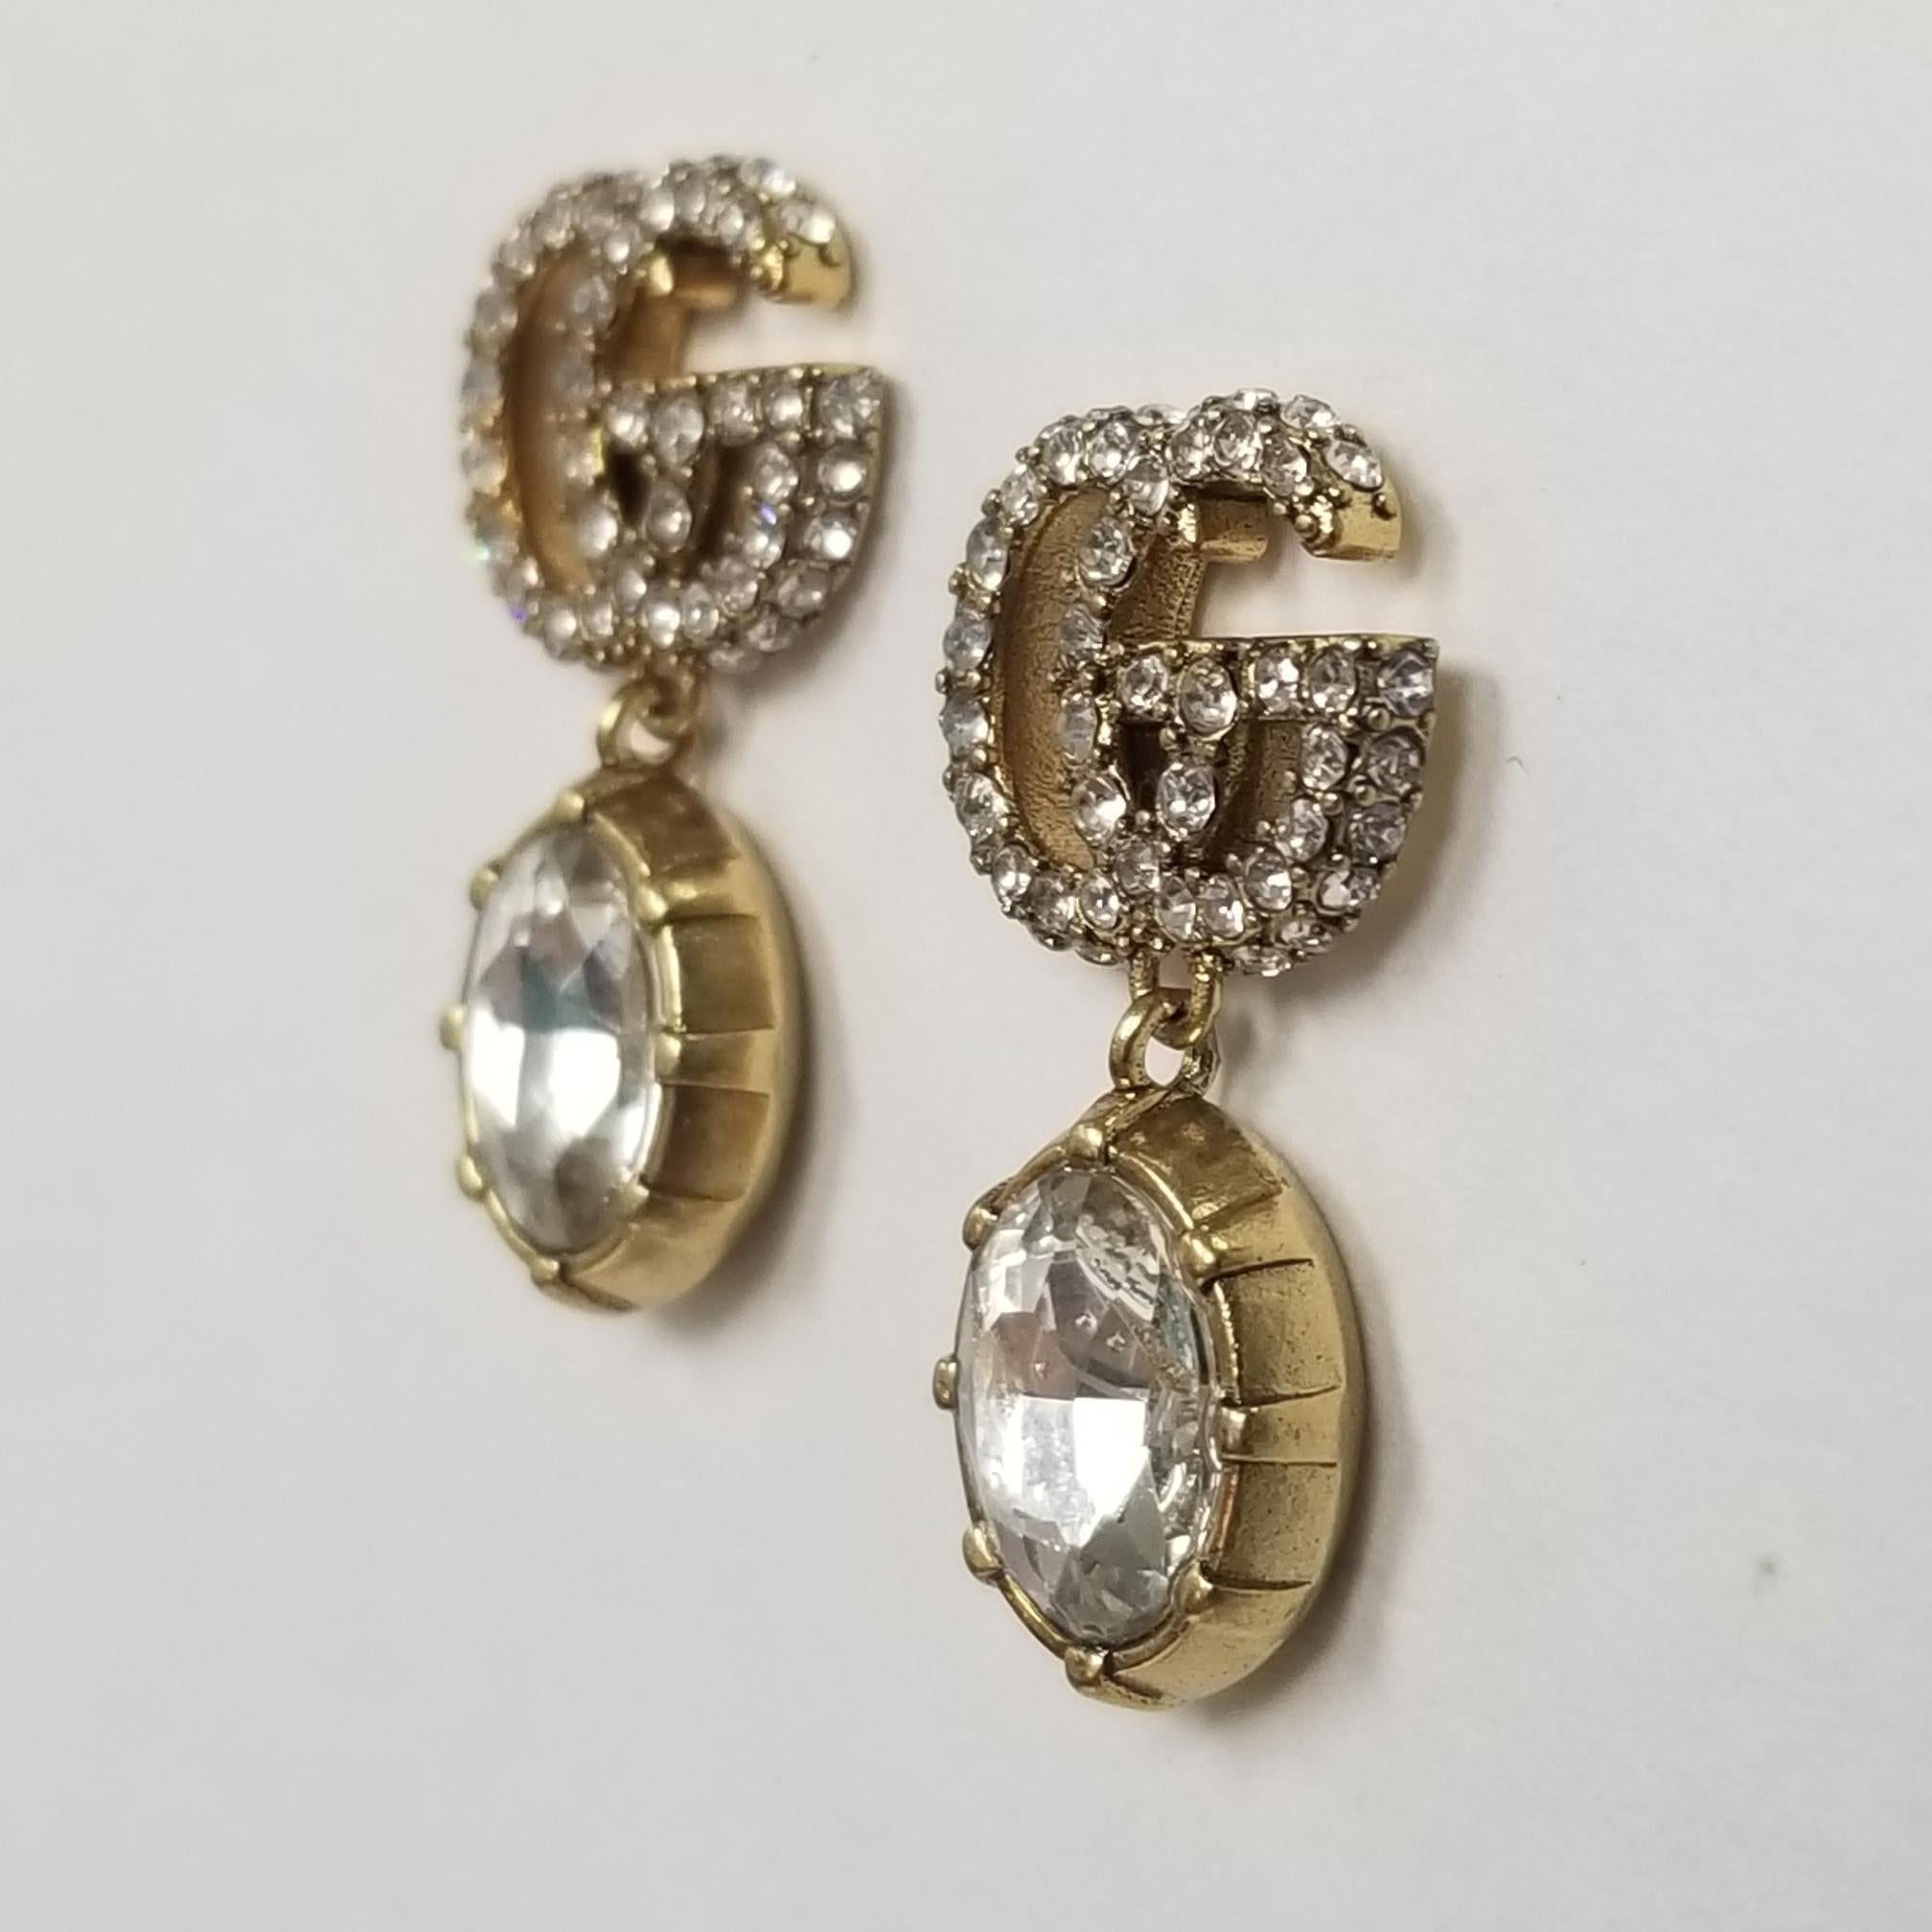  A white faceted crystal pendant combines with the crystal Double G detail, forming a sparkling pendant that completes these earrings in aged gold-toned metal.

    Metal with aged gold finish
    Crystal encrusted Double G detail
    White crystal